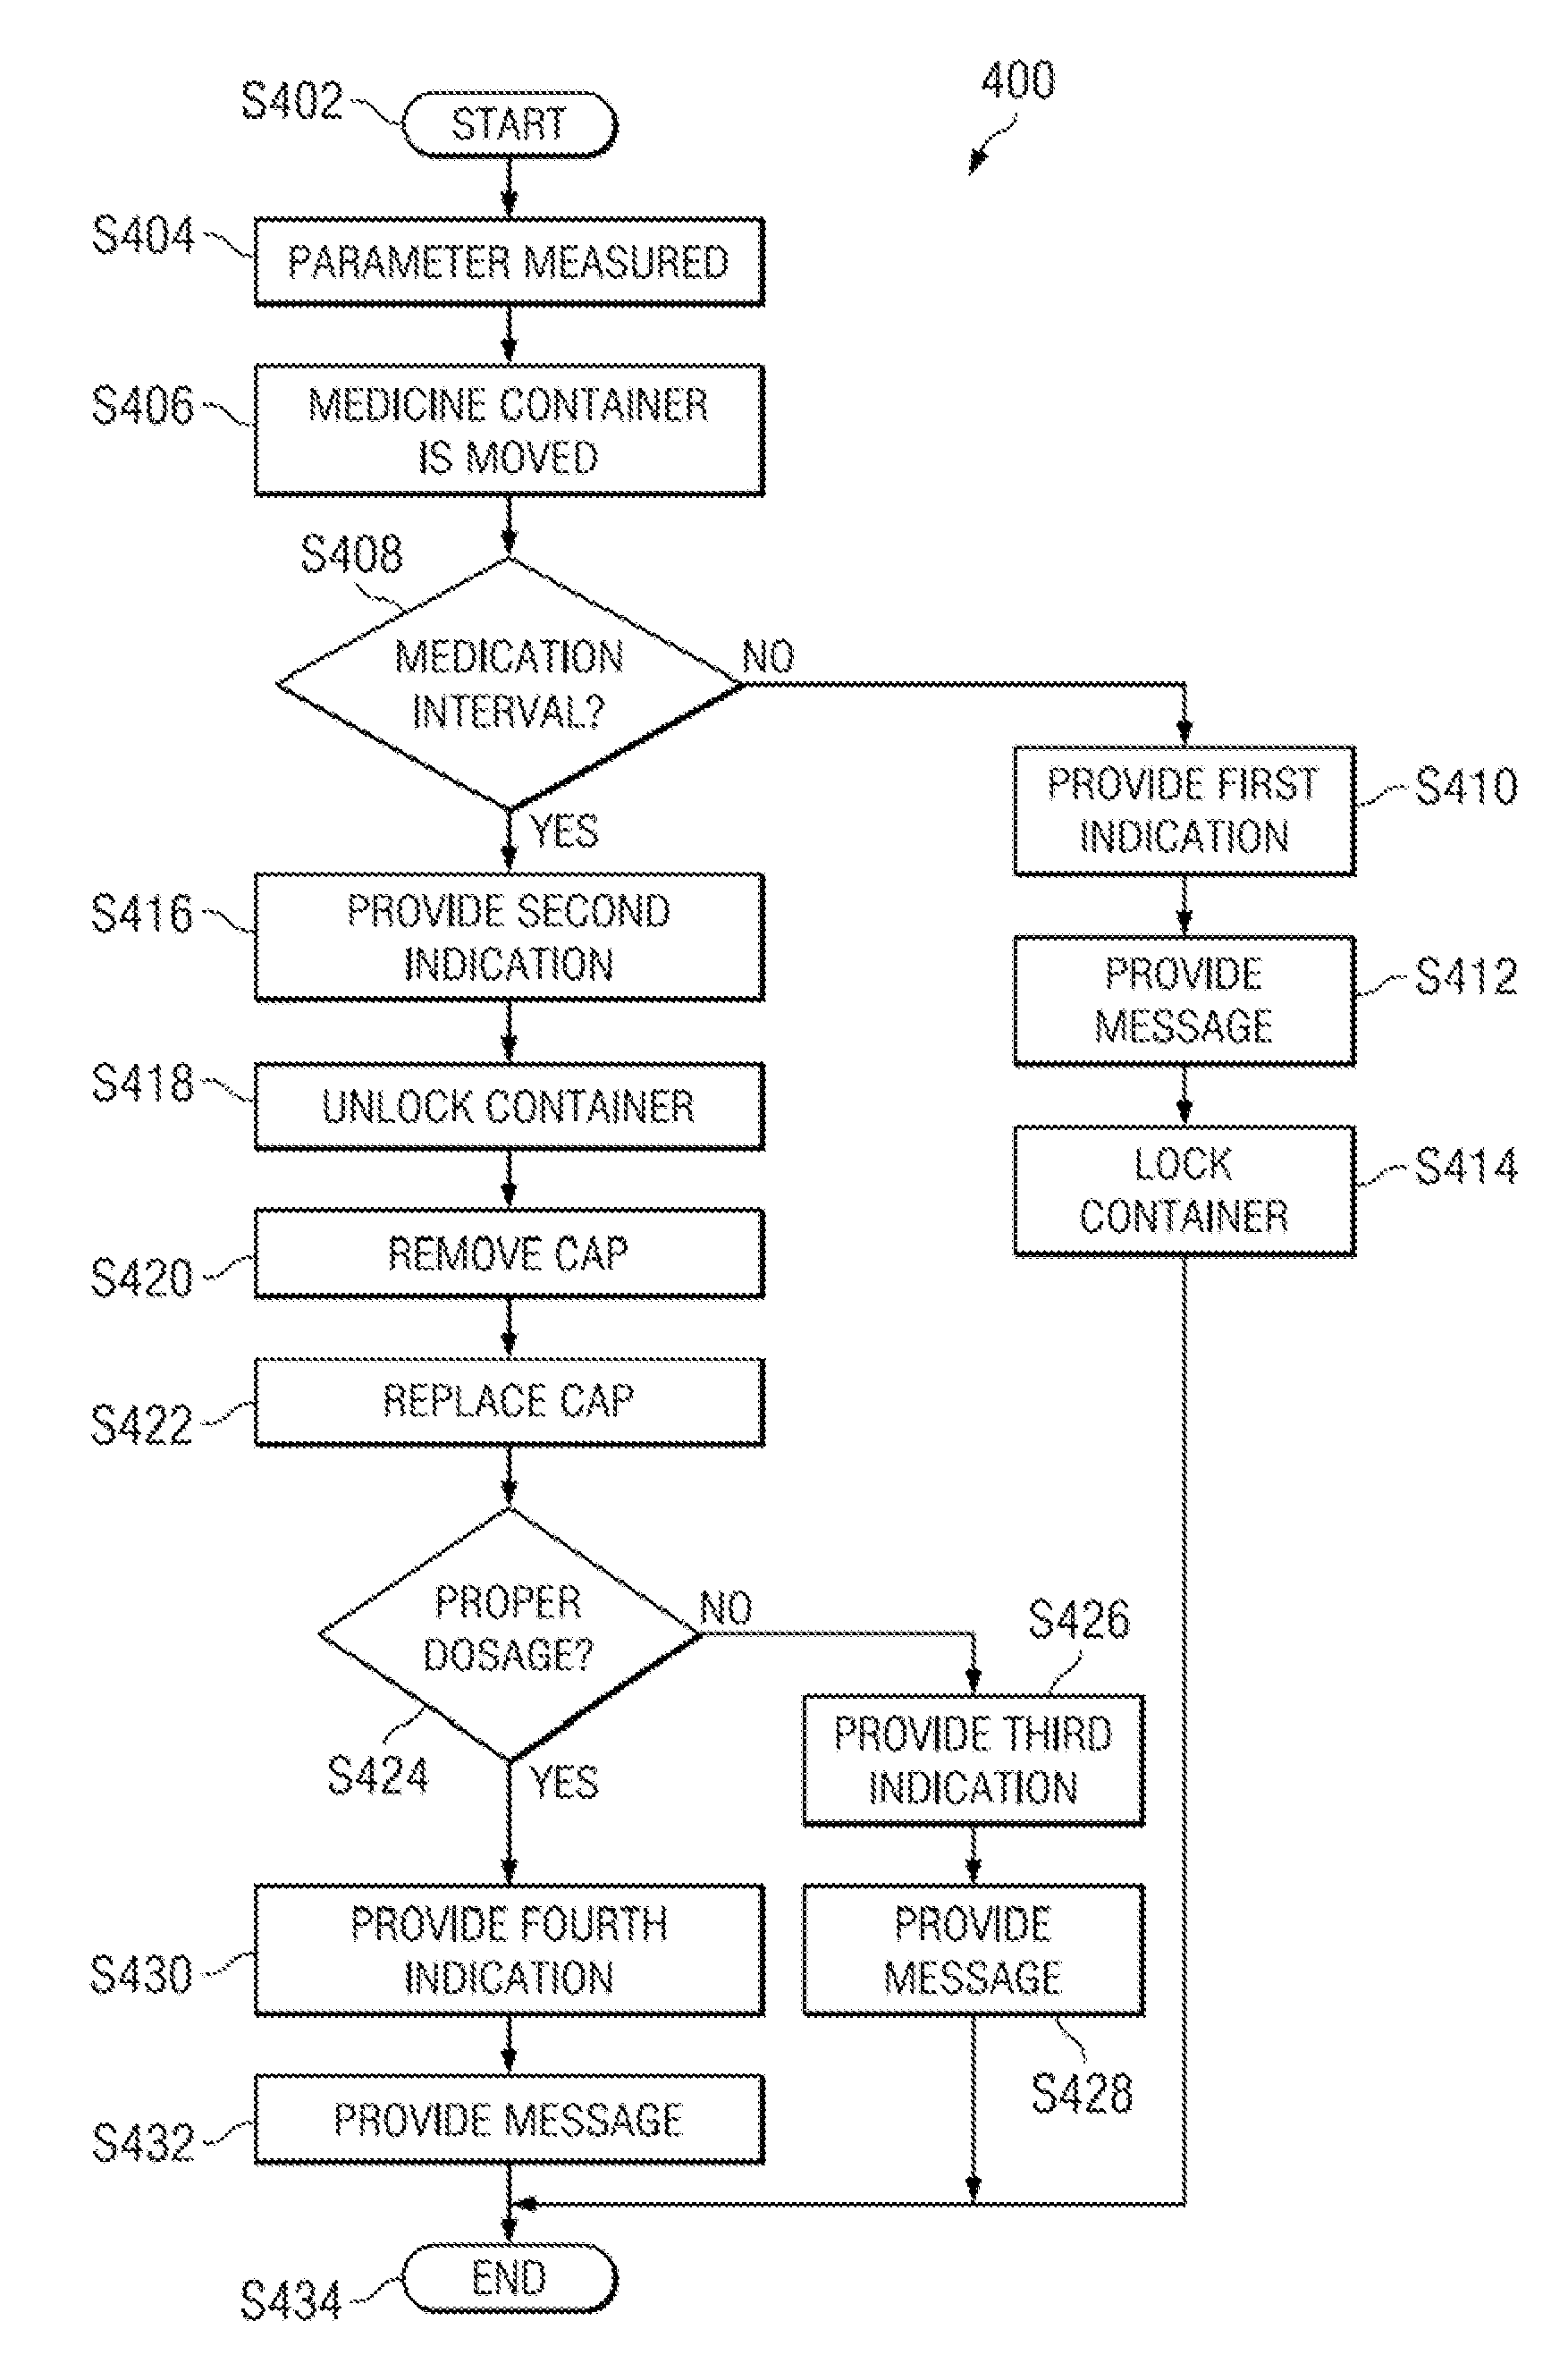 System and method for monitoring dispensing of medication